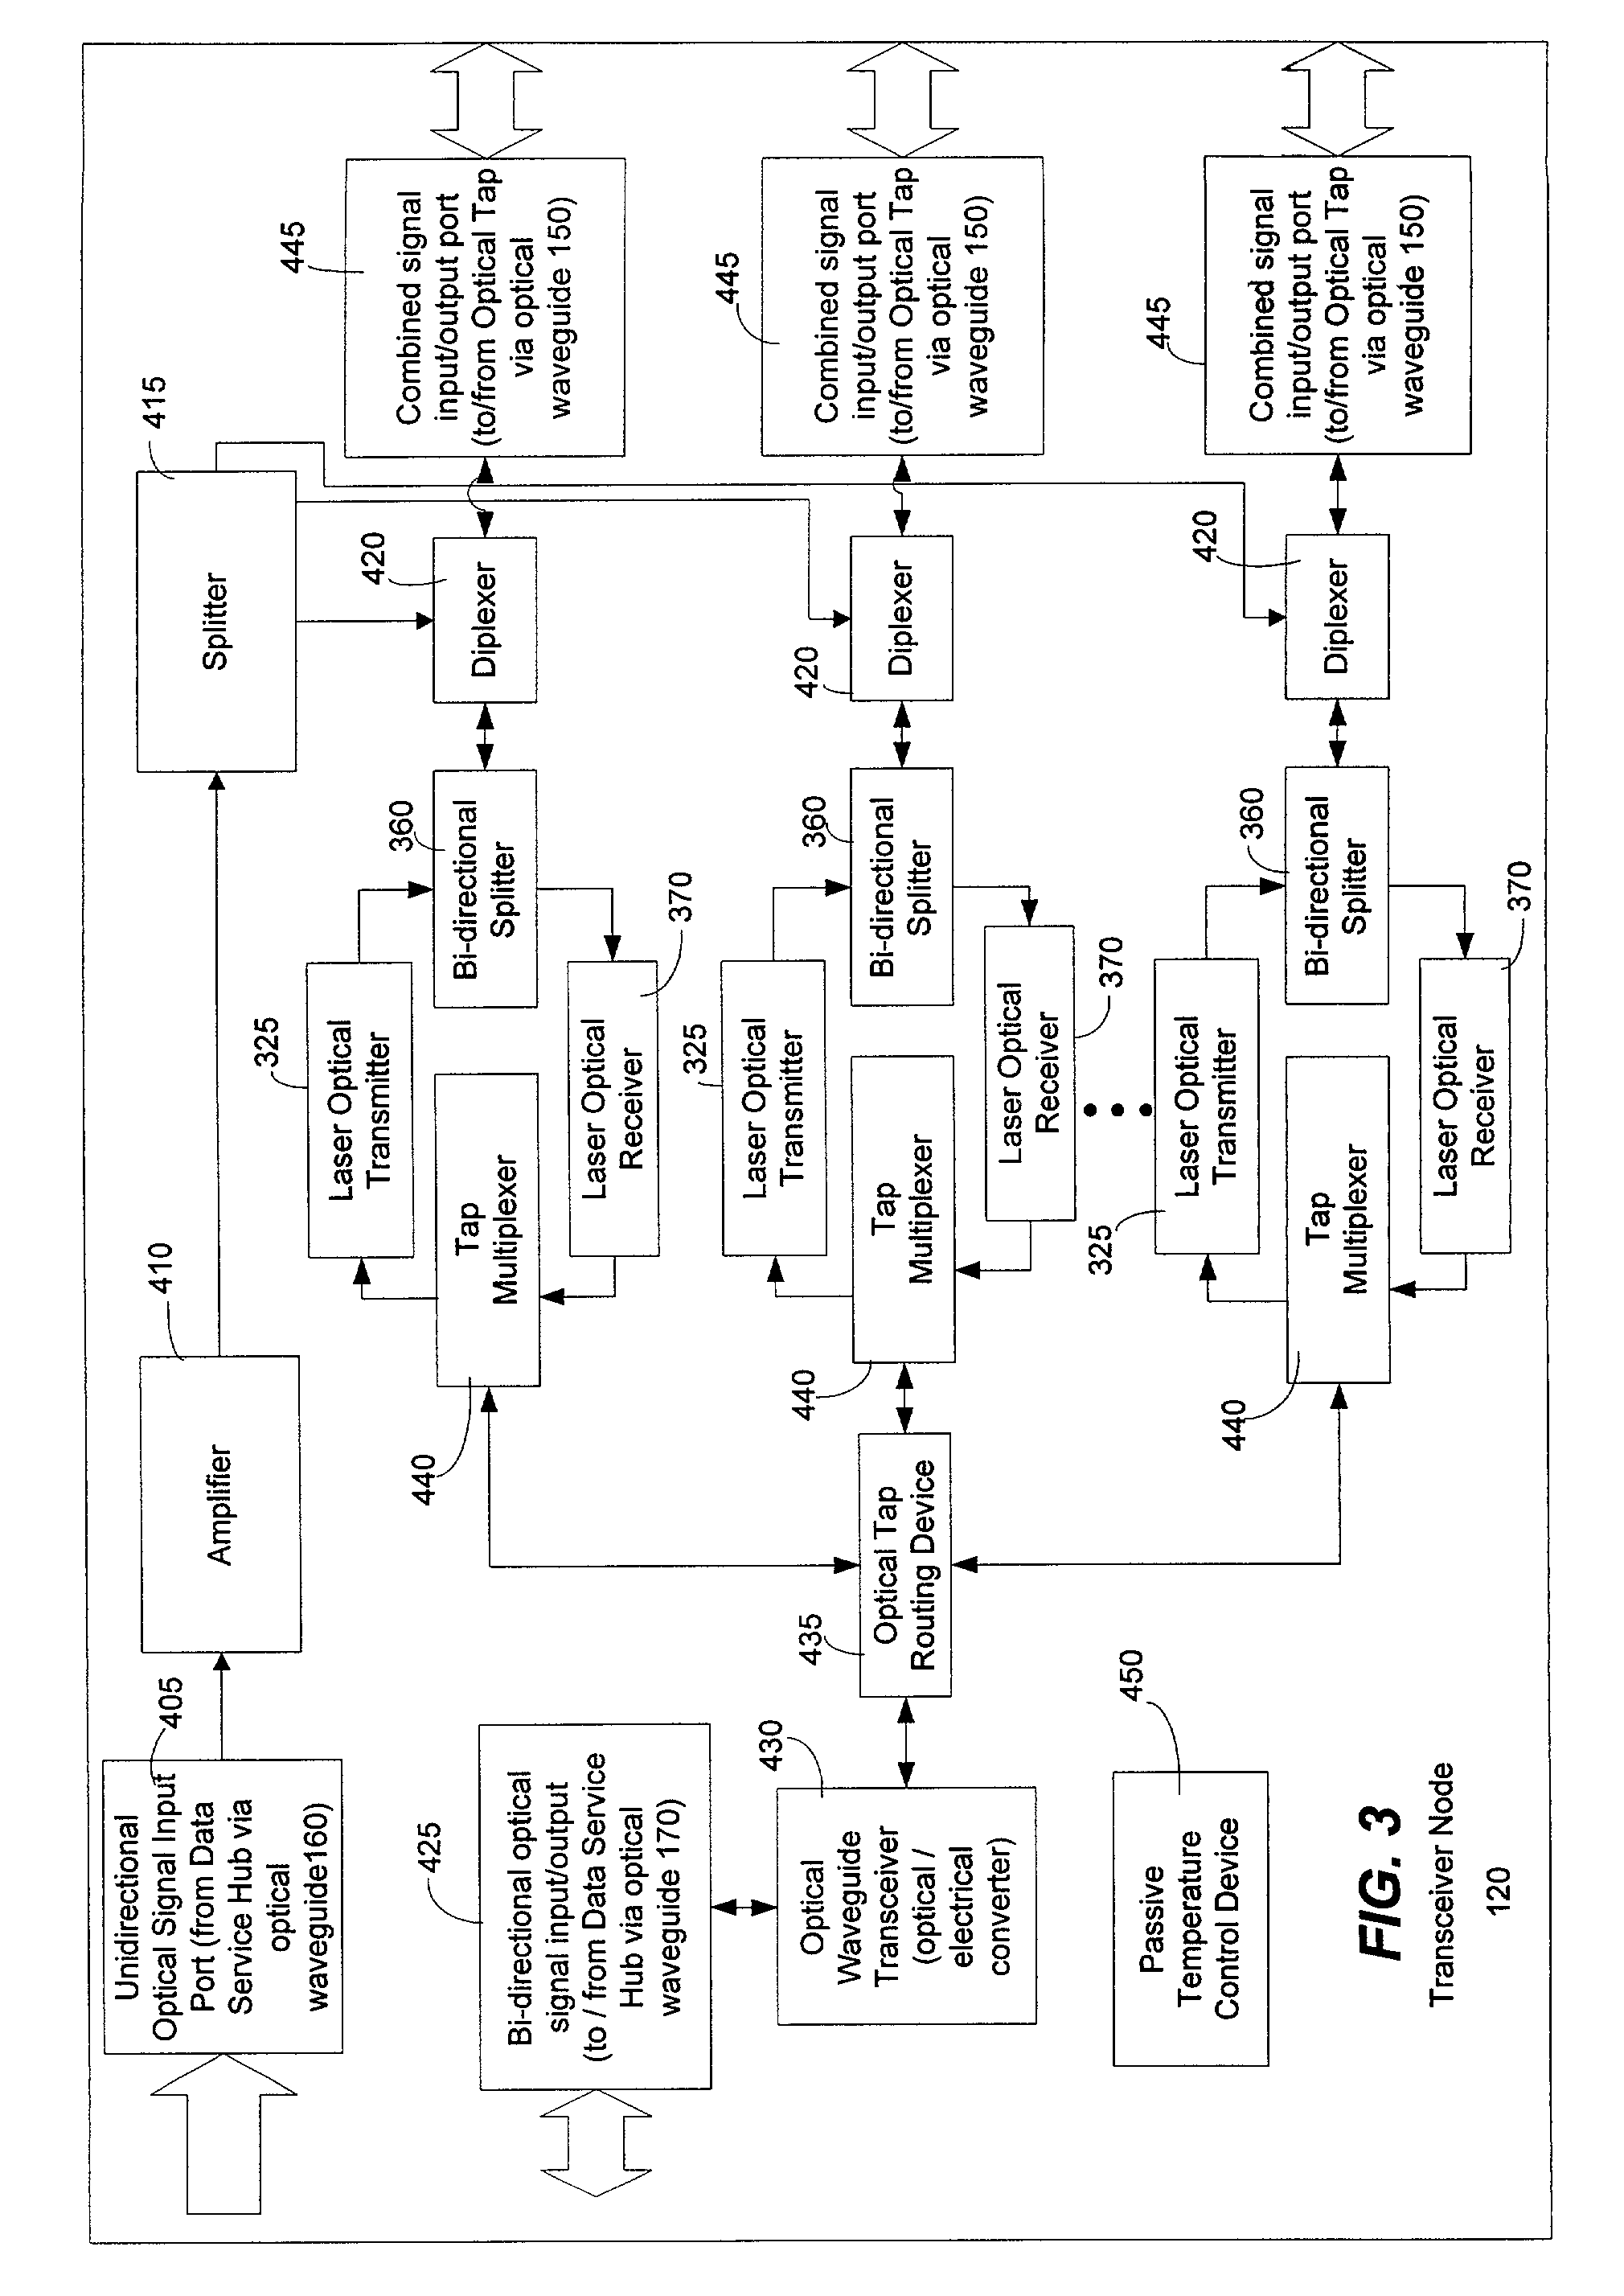 Method and system for processing upstream packets of an optical network